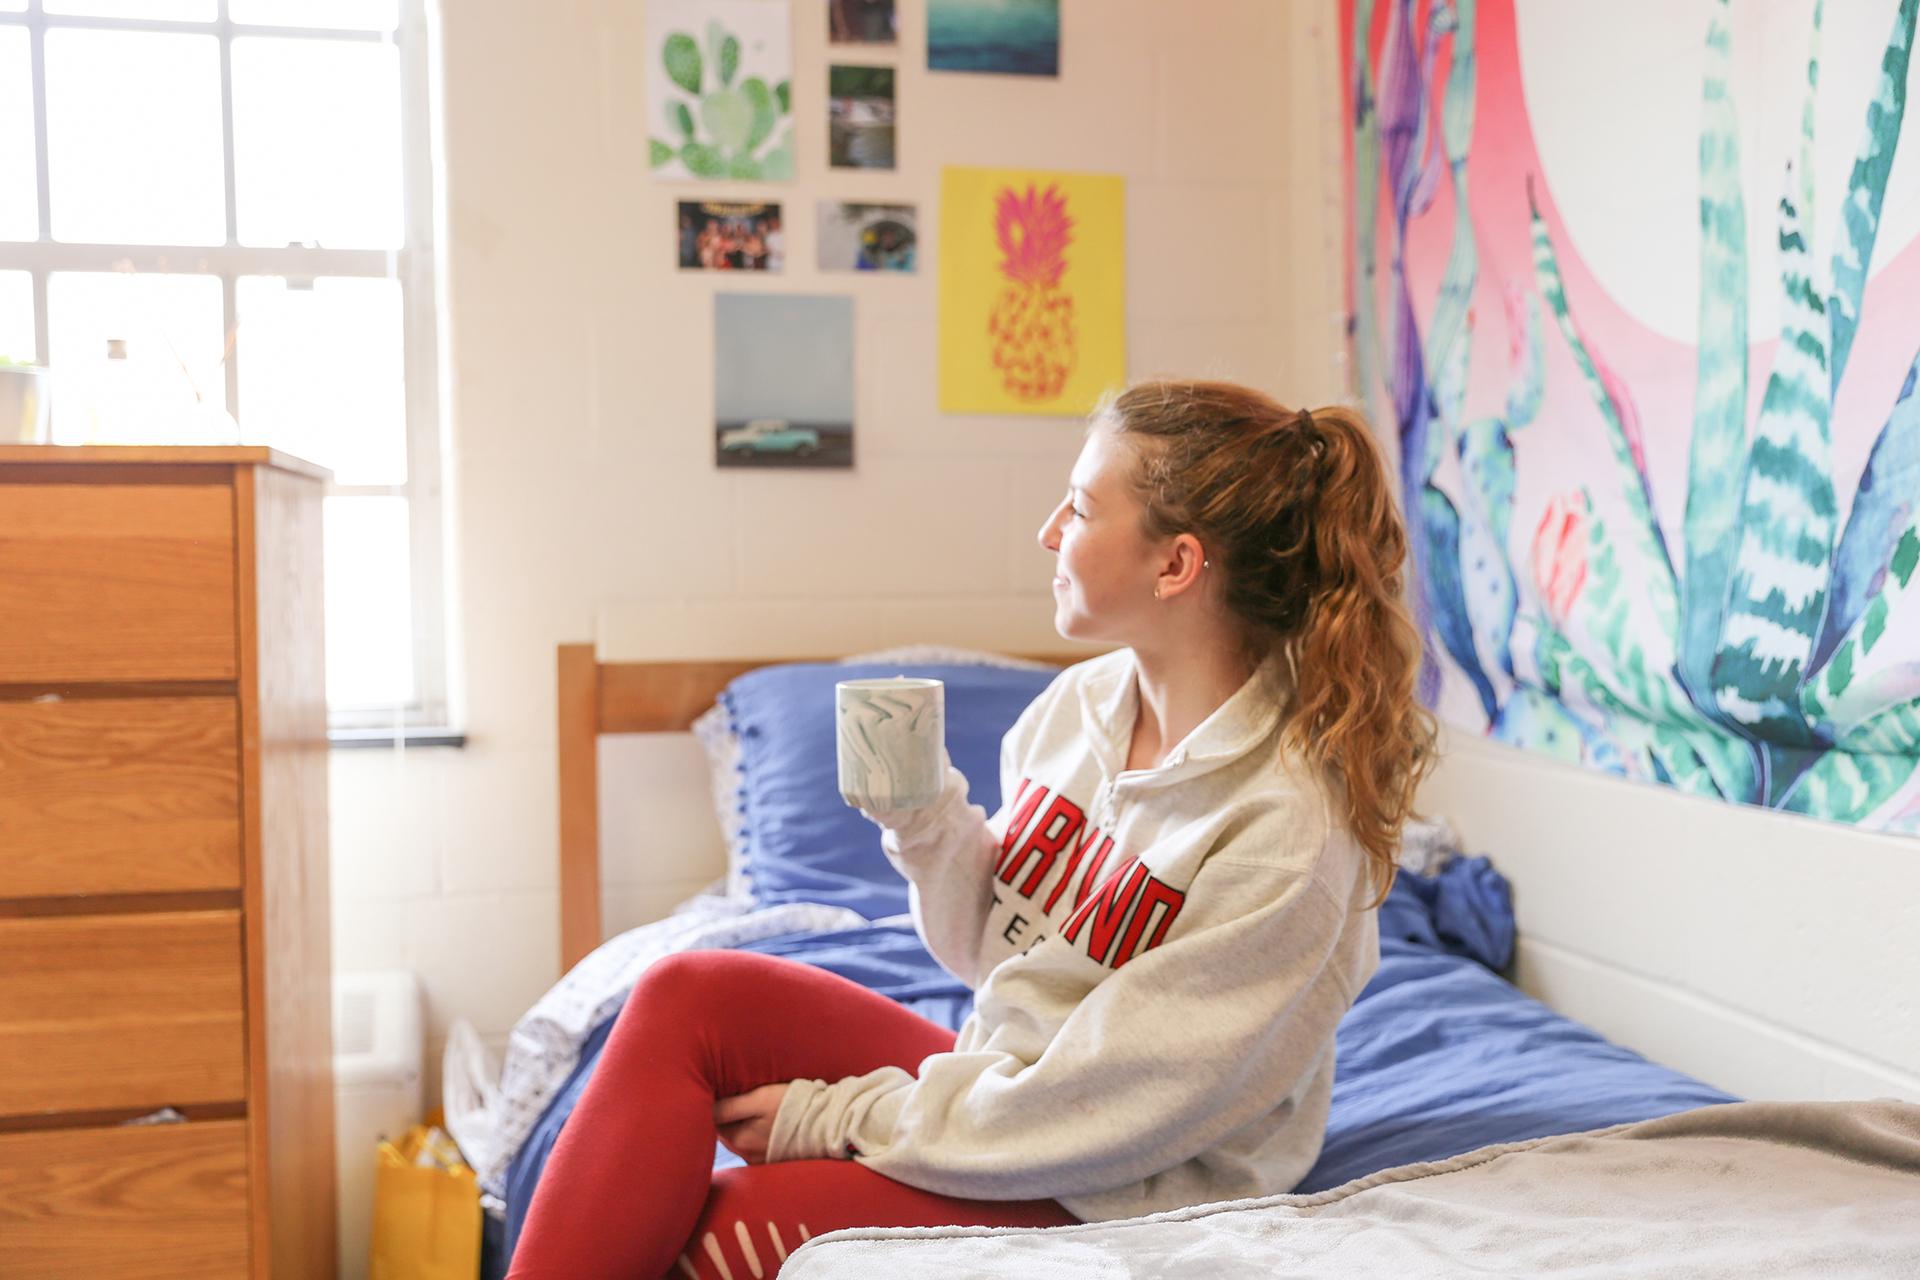 student holding coffee mug sitting in bed and turned sideways